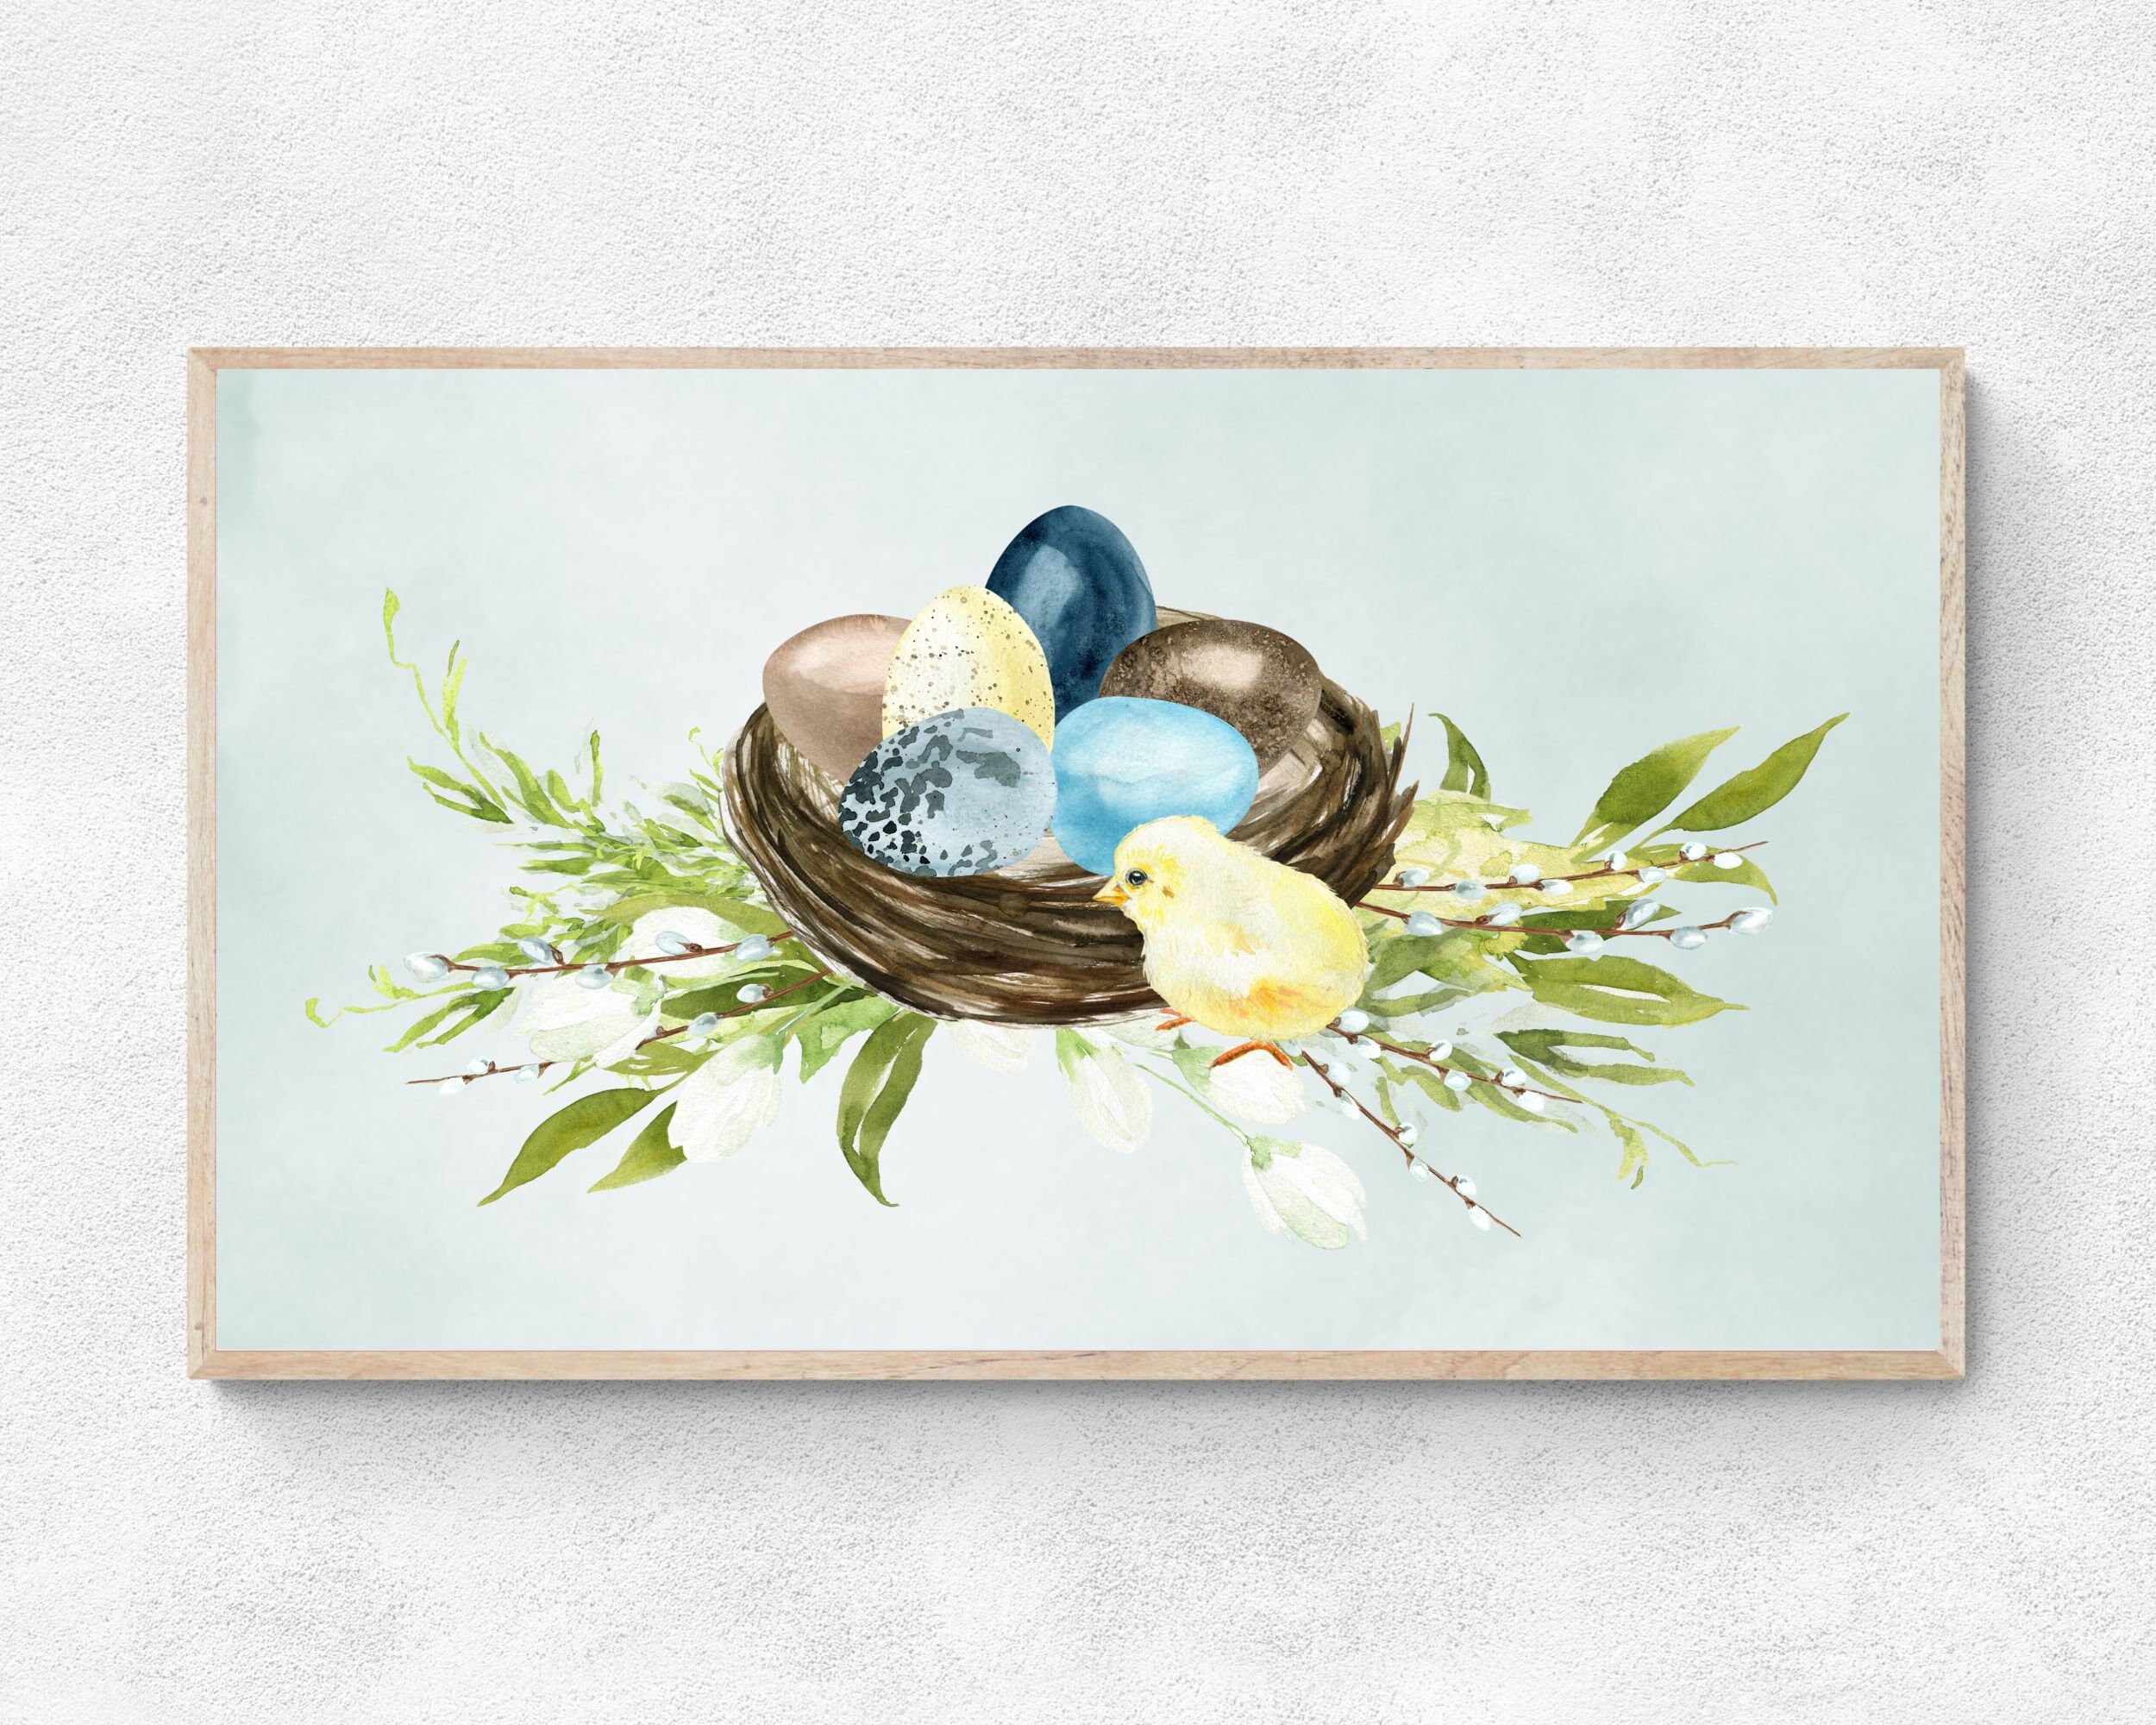 Samsung Frame TV Art Easter Eggs and Chick Tv Art Watercolor